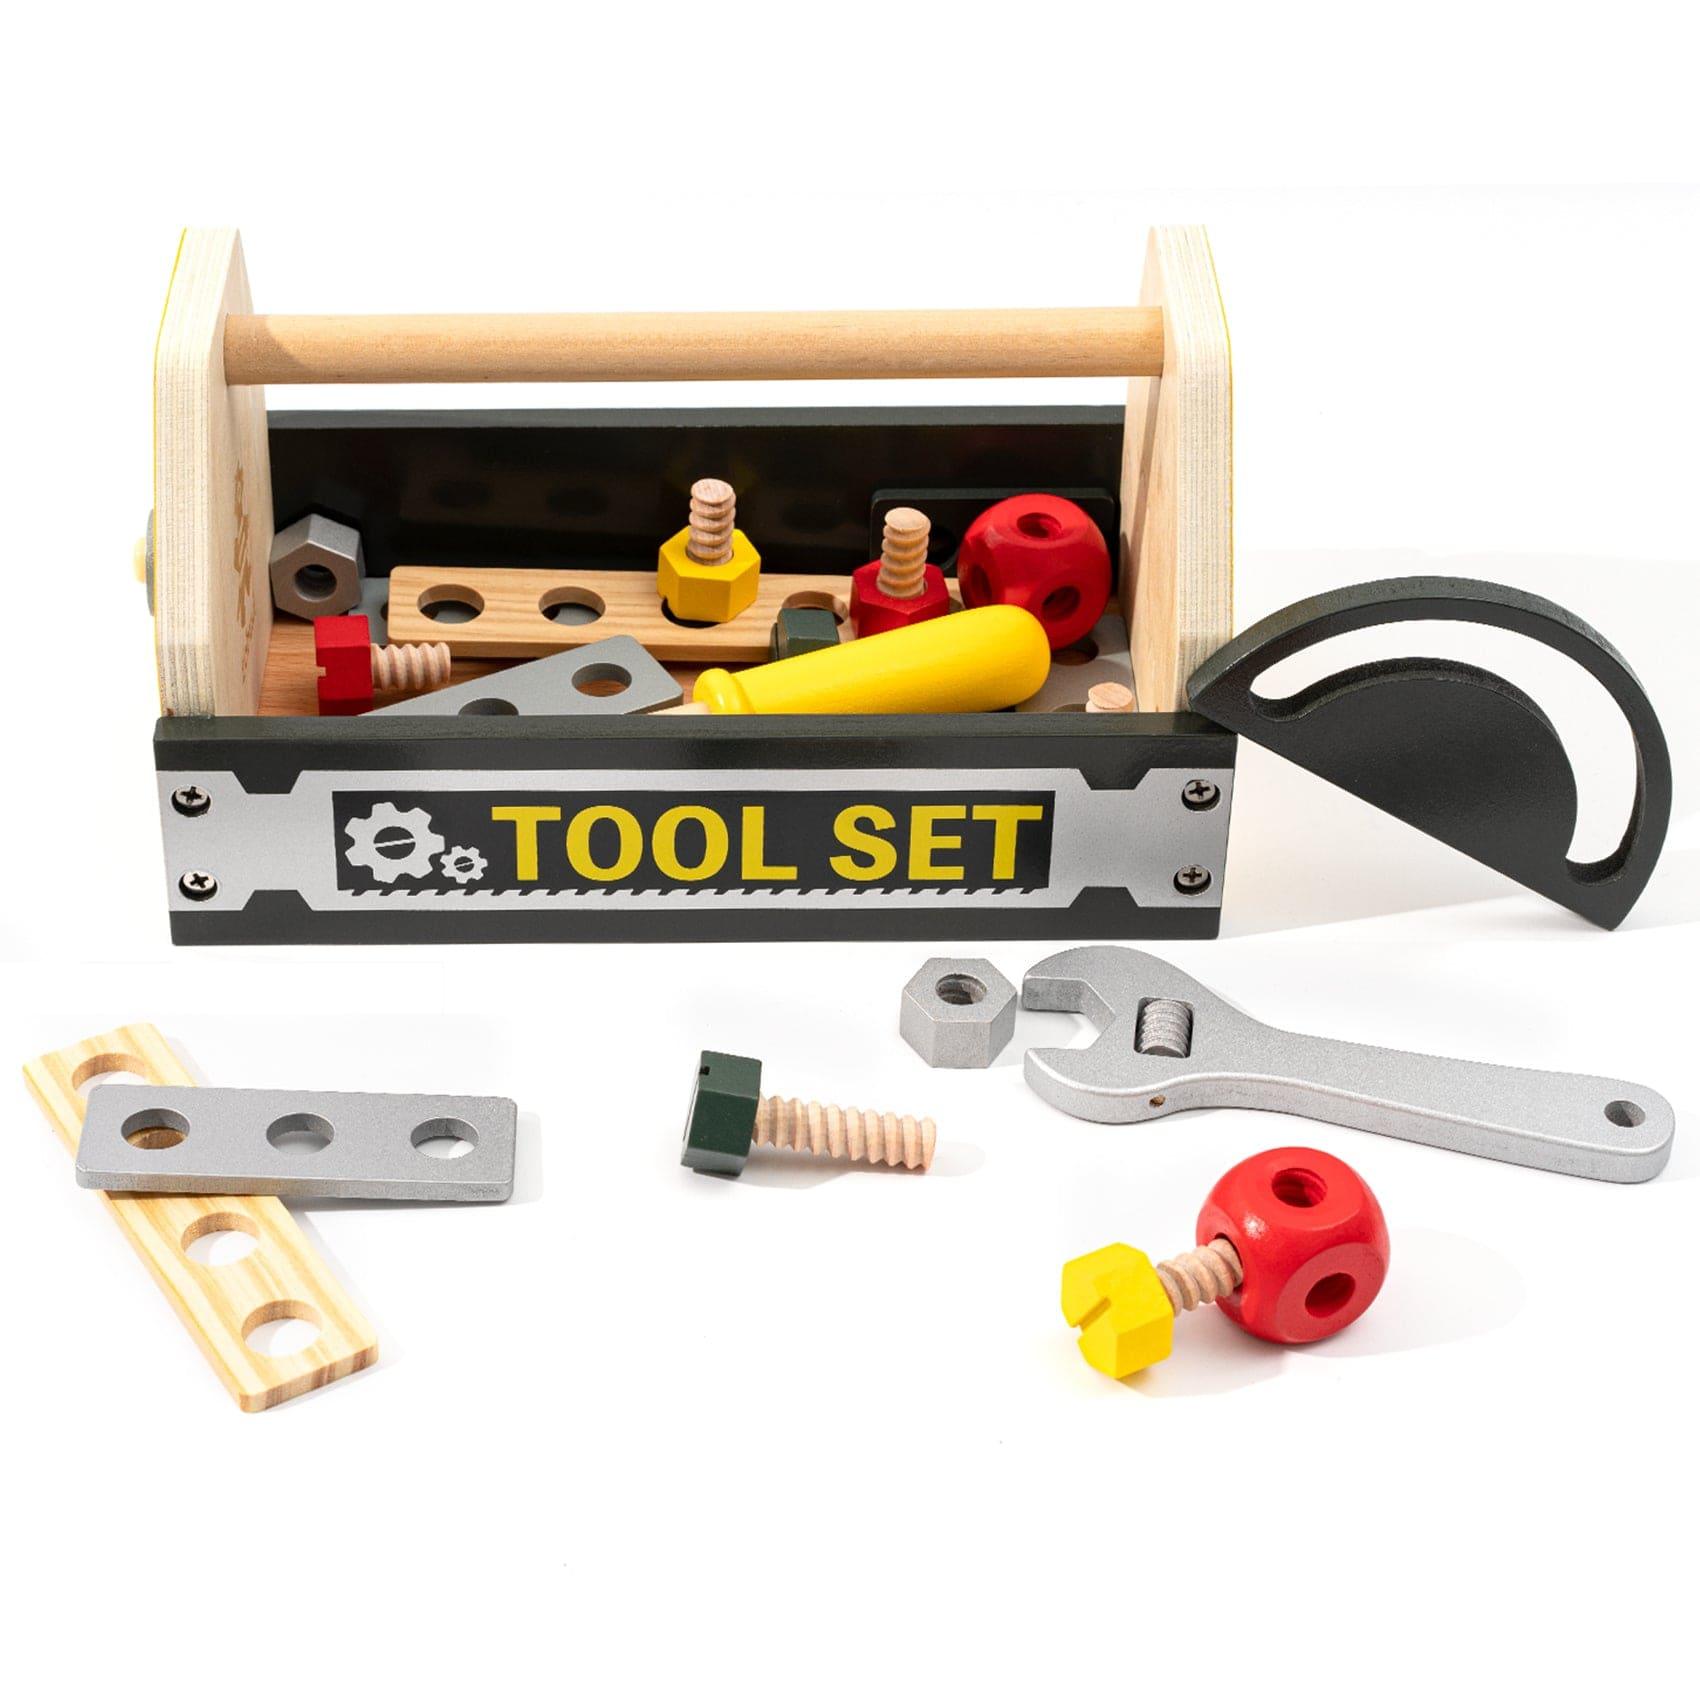 Shop Play Toolbox Kids Workbench Tools for Toddlers Boys Girls Mademoiselle Home Decor